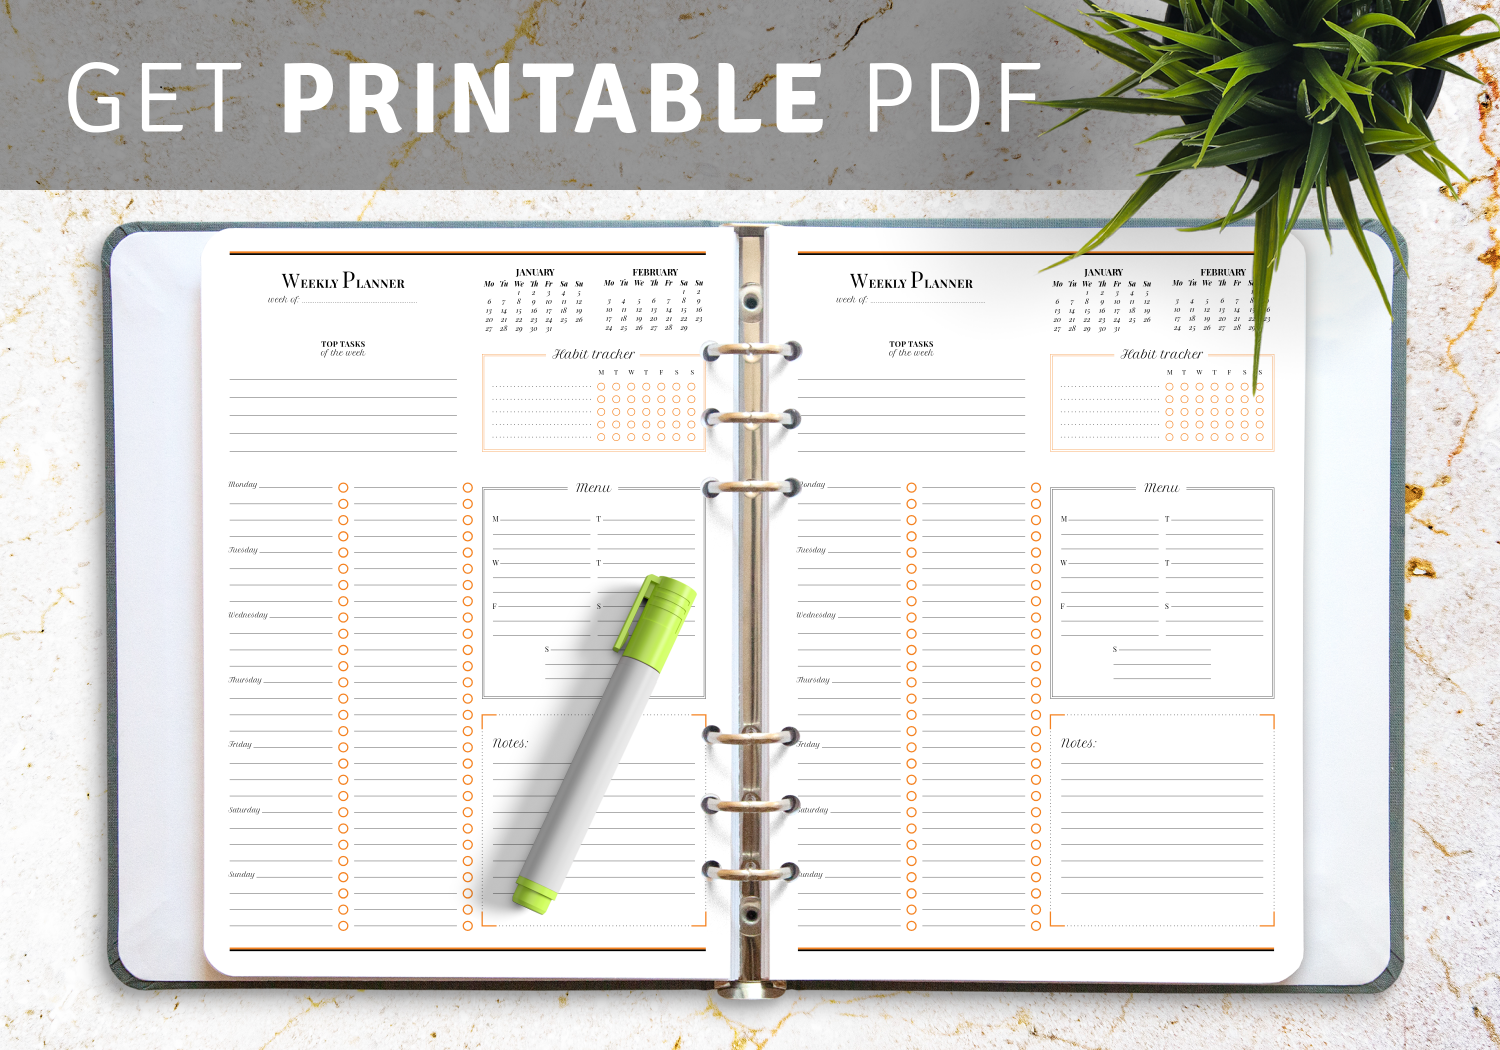 February monthly planner, weekly planner, habit tracker template